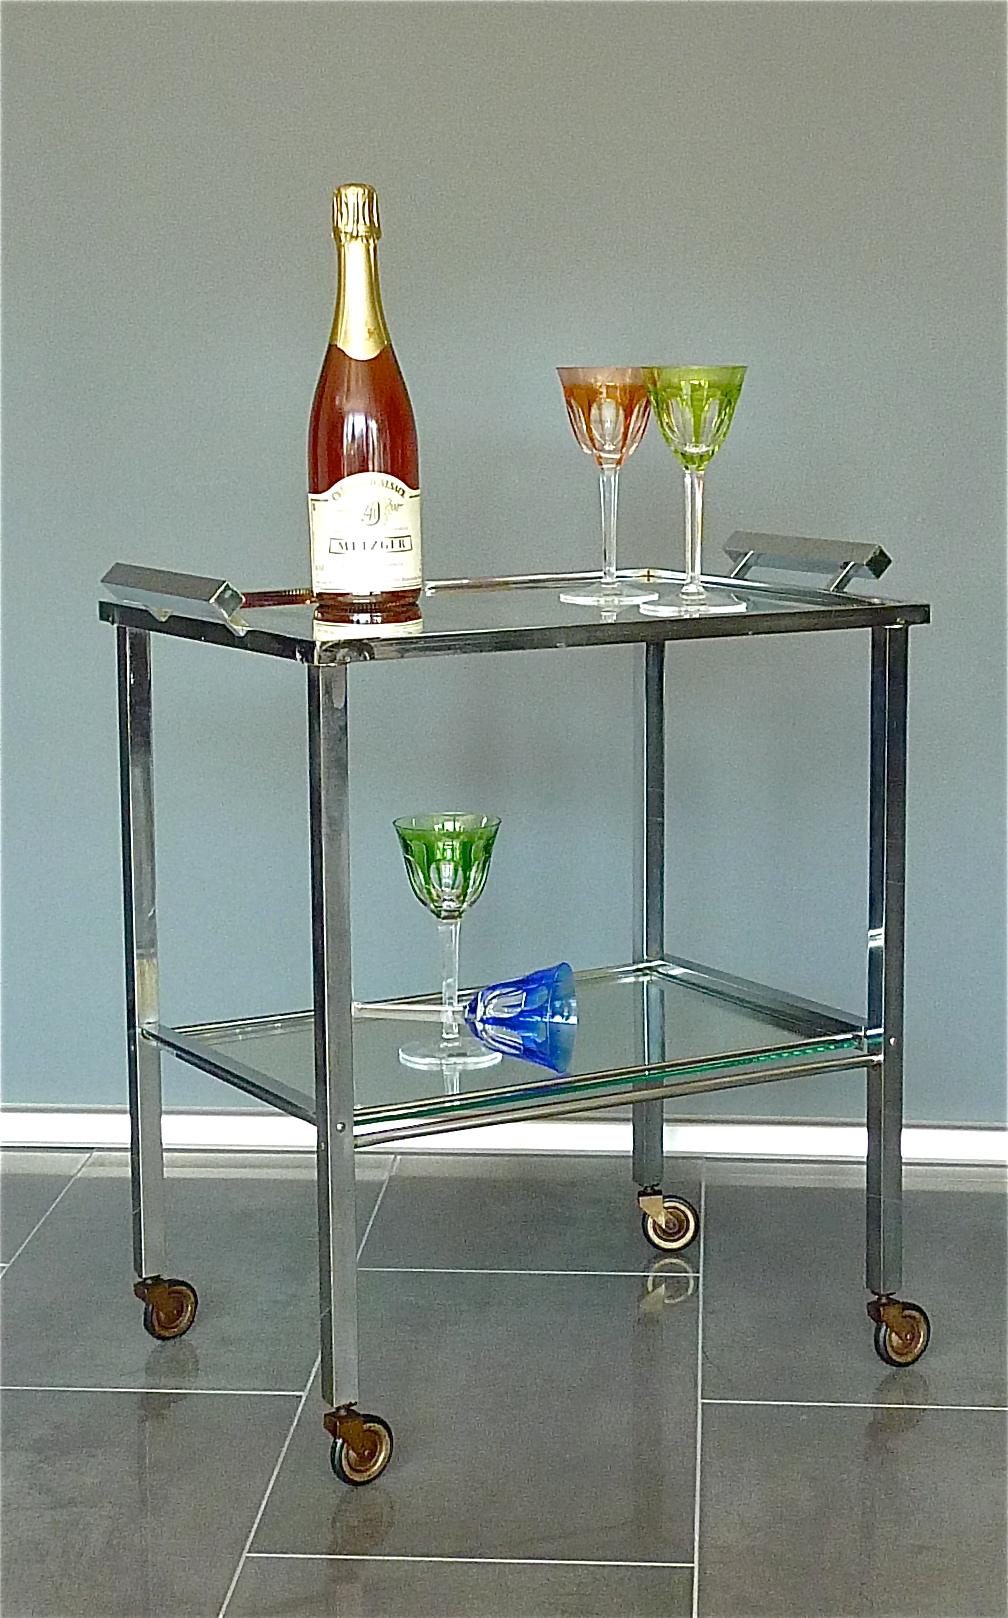 Great vintage modernist Bauhaus or Art Deco bar cart, drinks or serving table or trolley on four small wheels designed and executed in the 1920s-1930s in Germany or France. Very in the style of Jacques Adnet it is made of patinated chromed brass